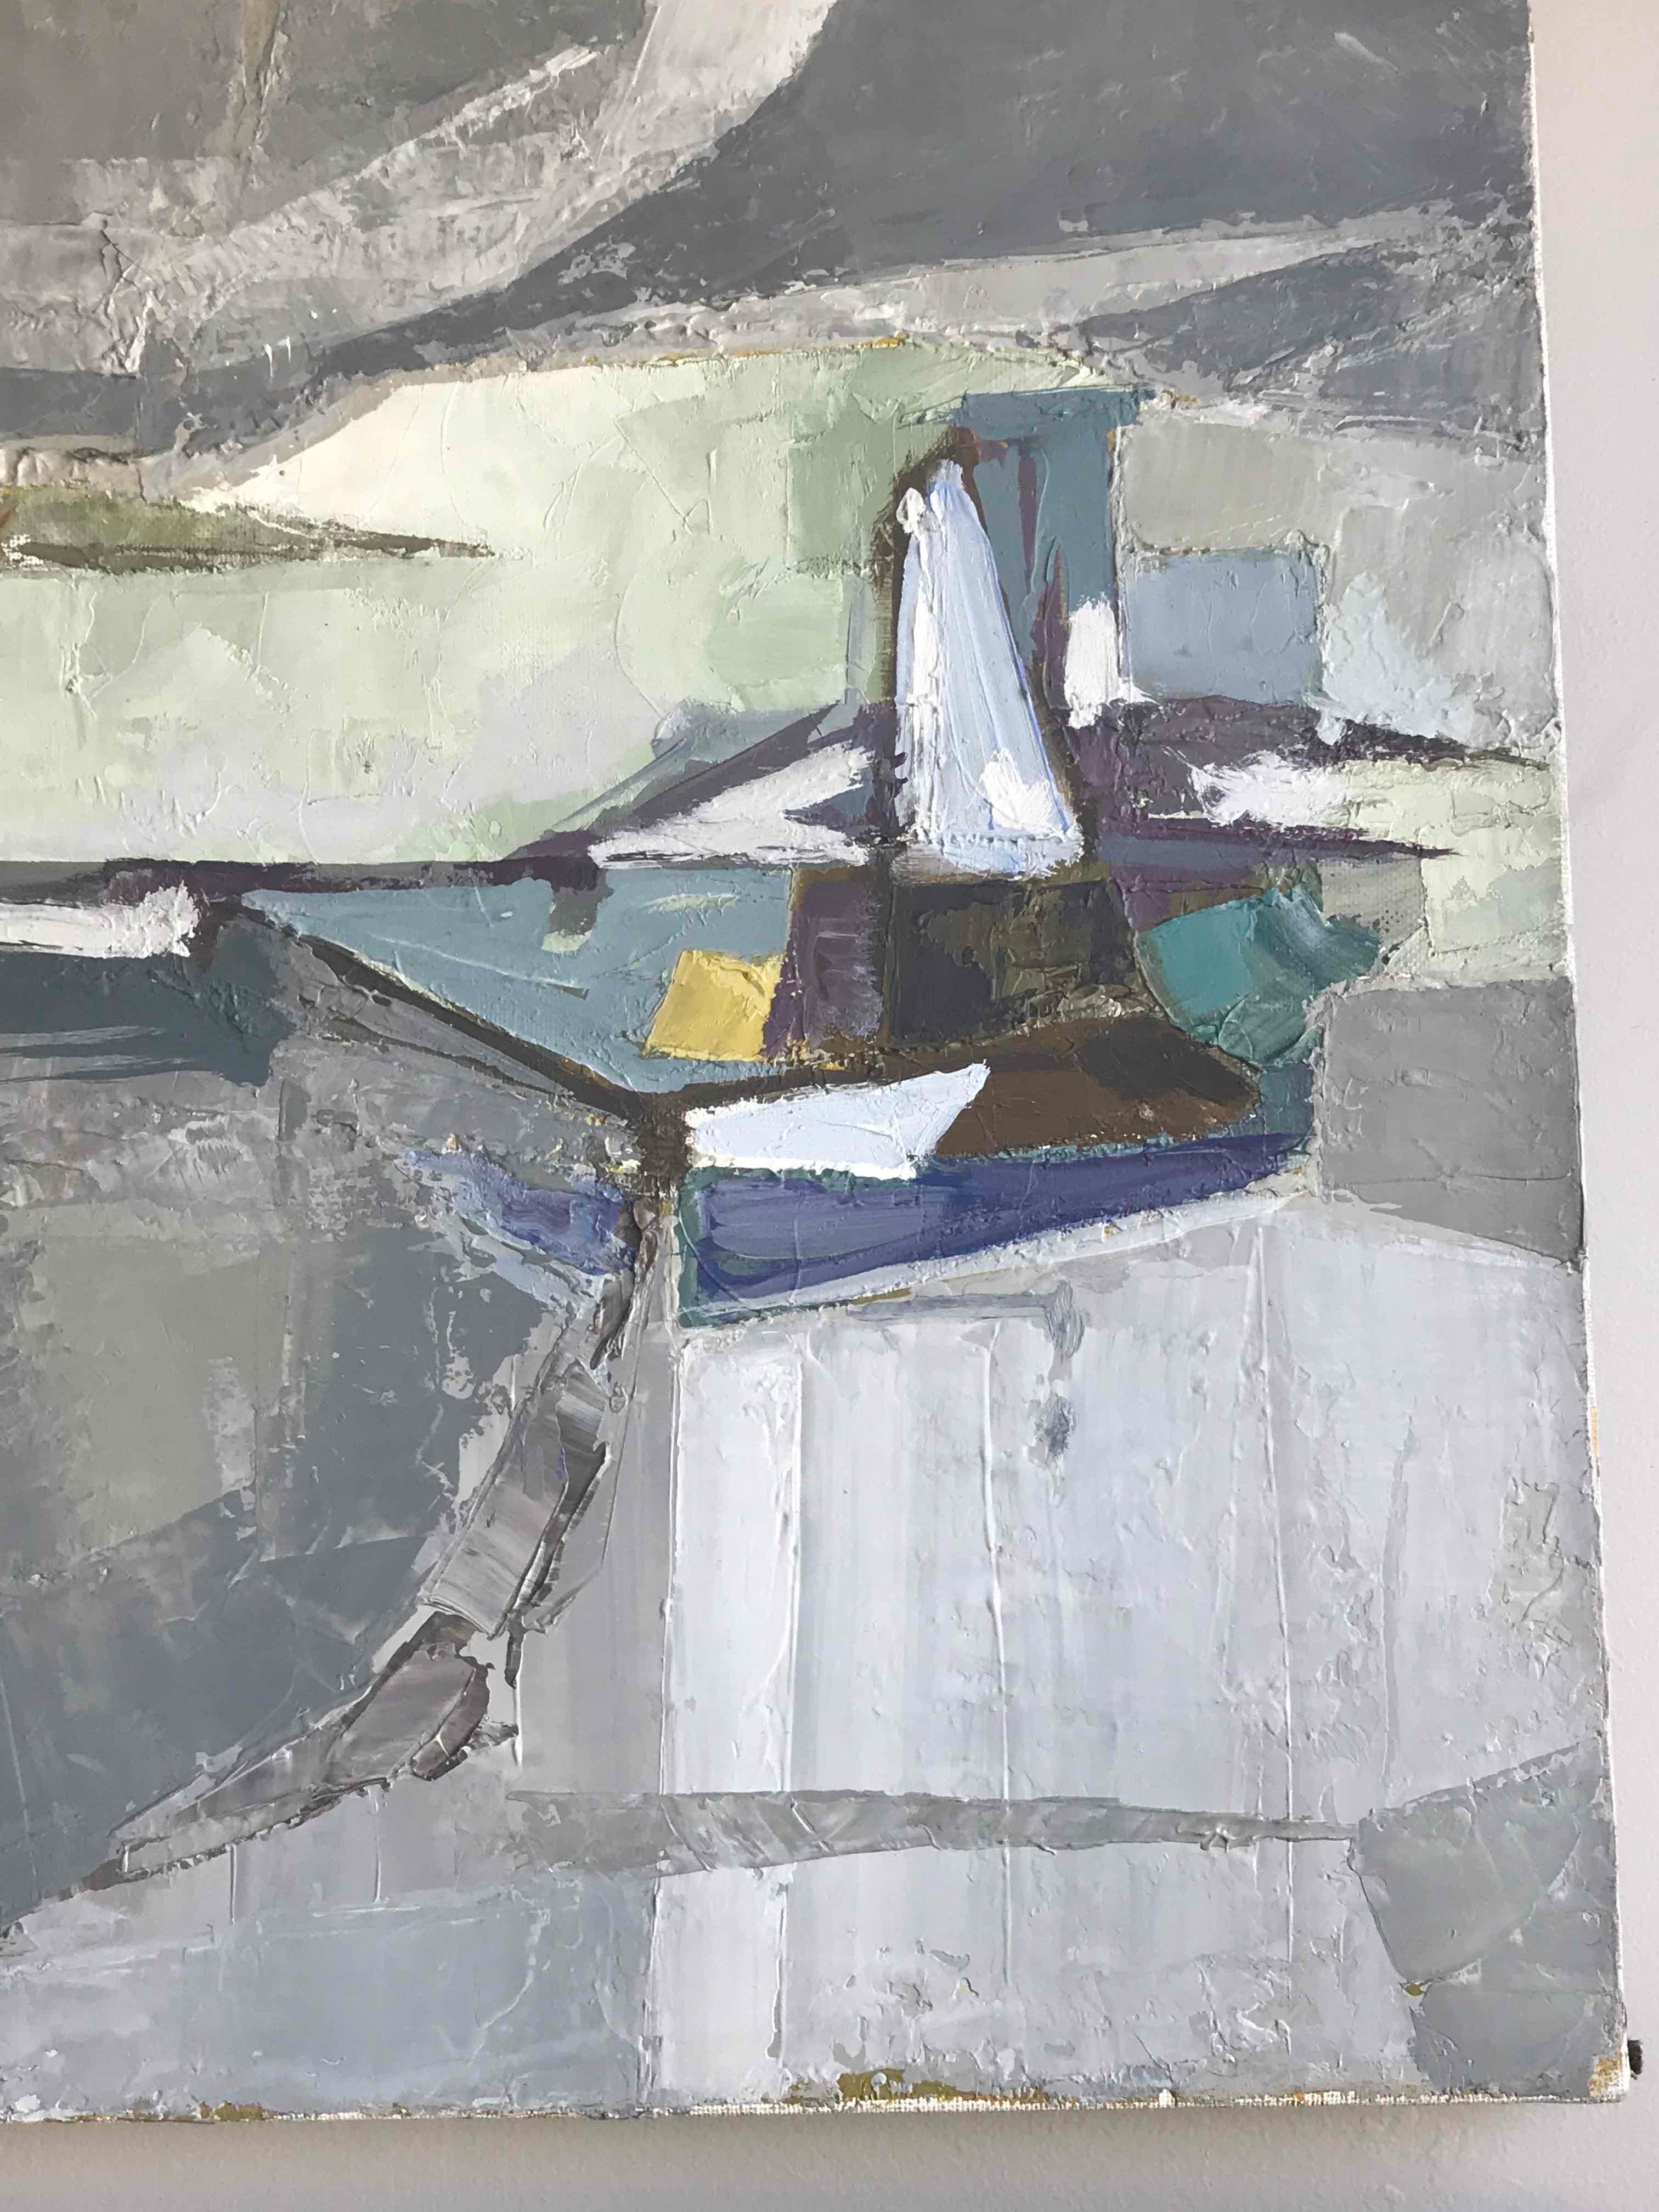 Abstracted landscape oil painting from 1960s France by artist Planet. With wonderfully layered blue-gray tones, the piece evokes paintings by Cezanne or Richard Diebenkorn. 

France, circa 1960

Dimensions: 23.5W x 1D x 29H